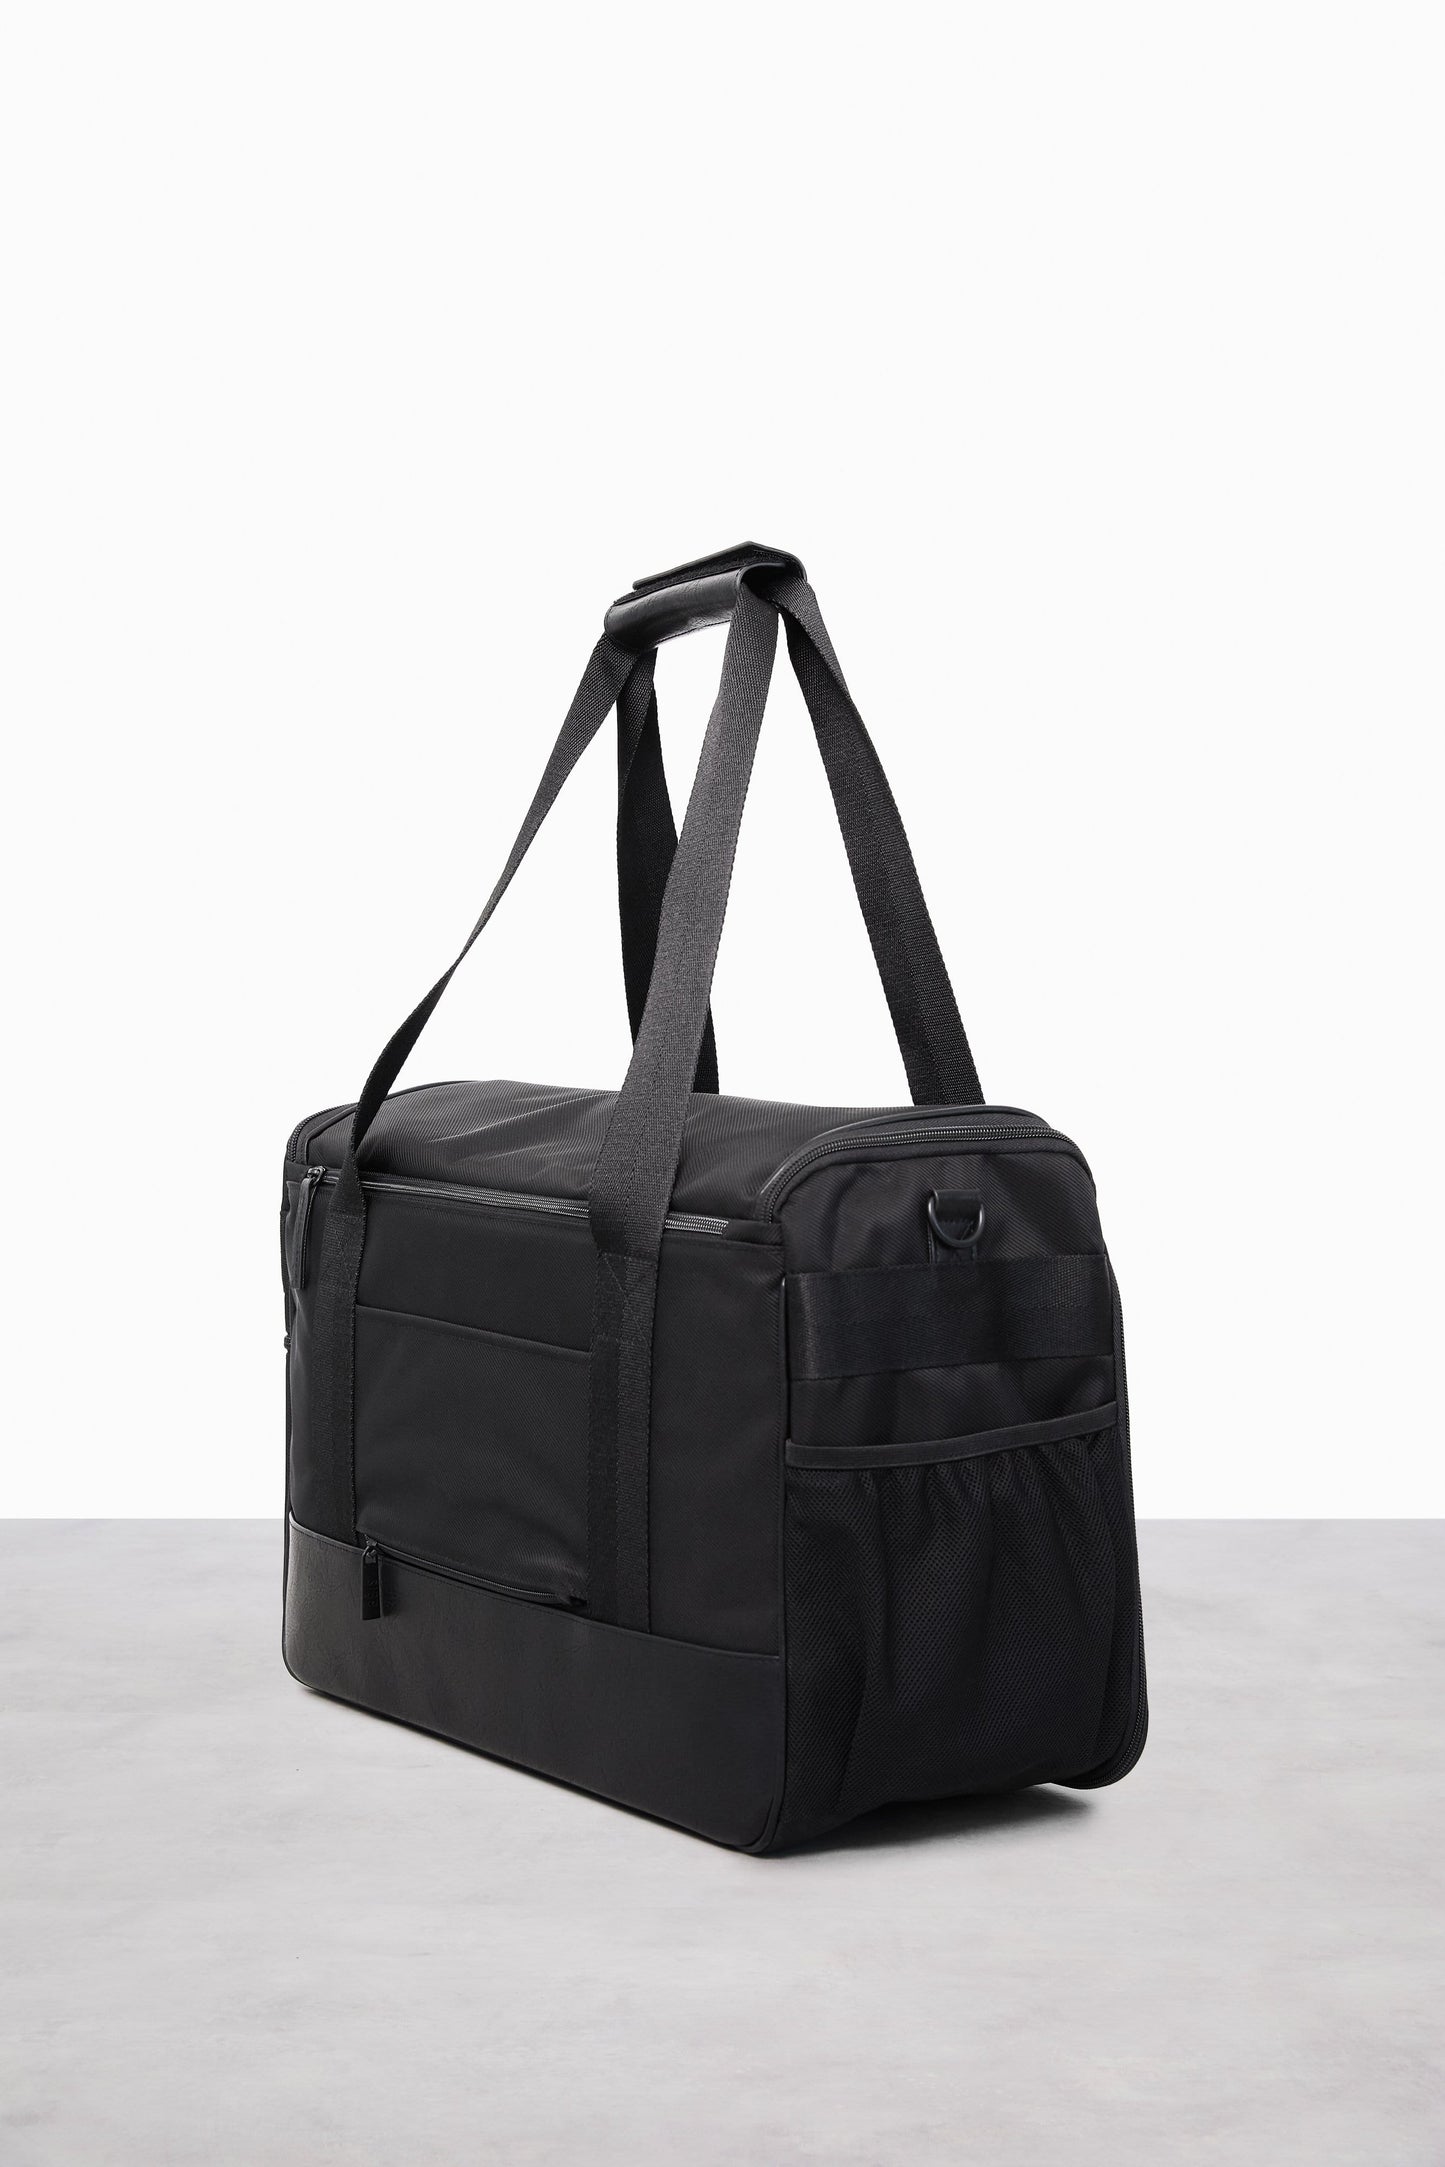 Hanging Duffle Black Side and Trolley Passthrough